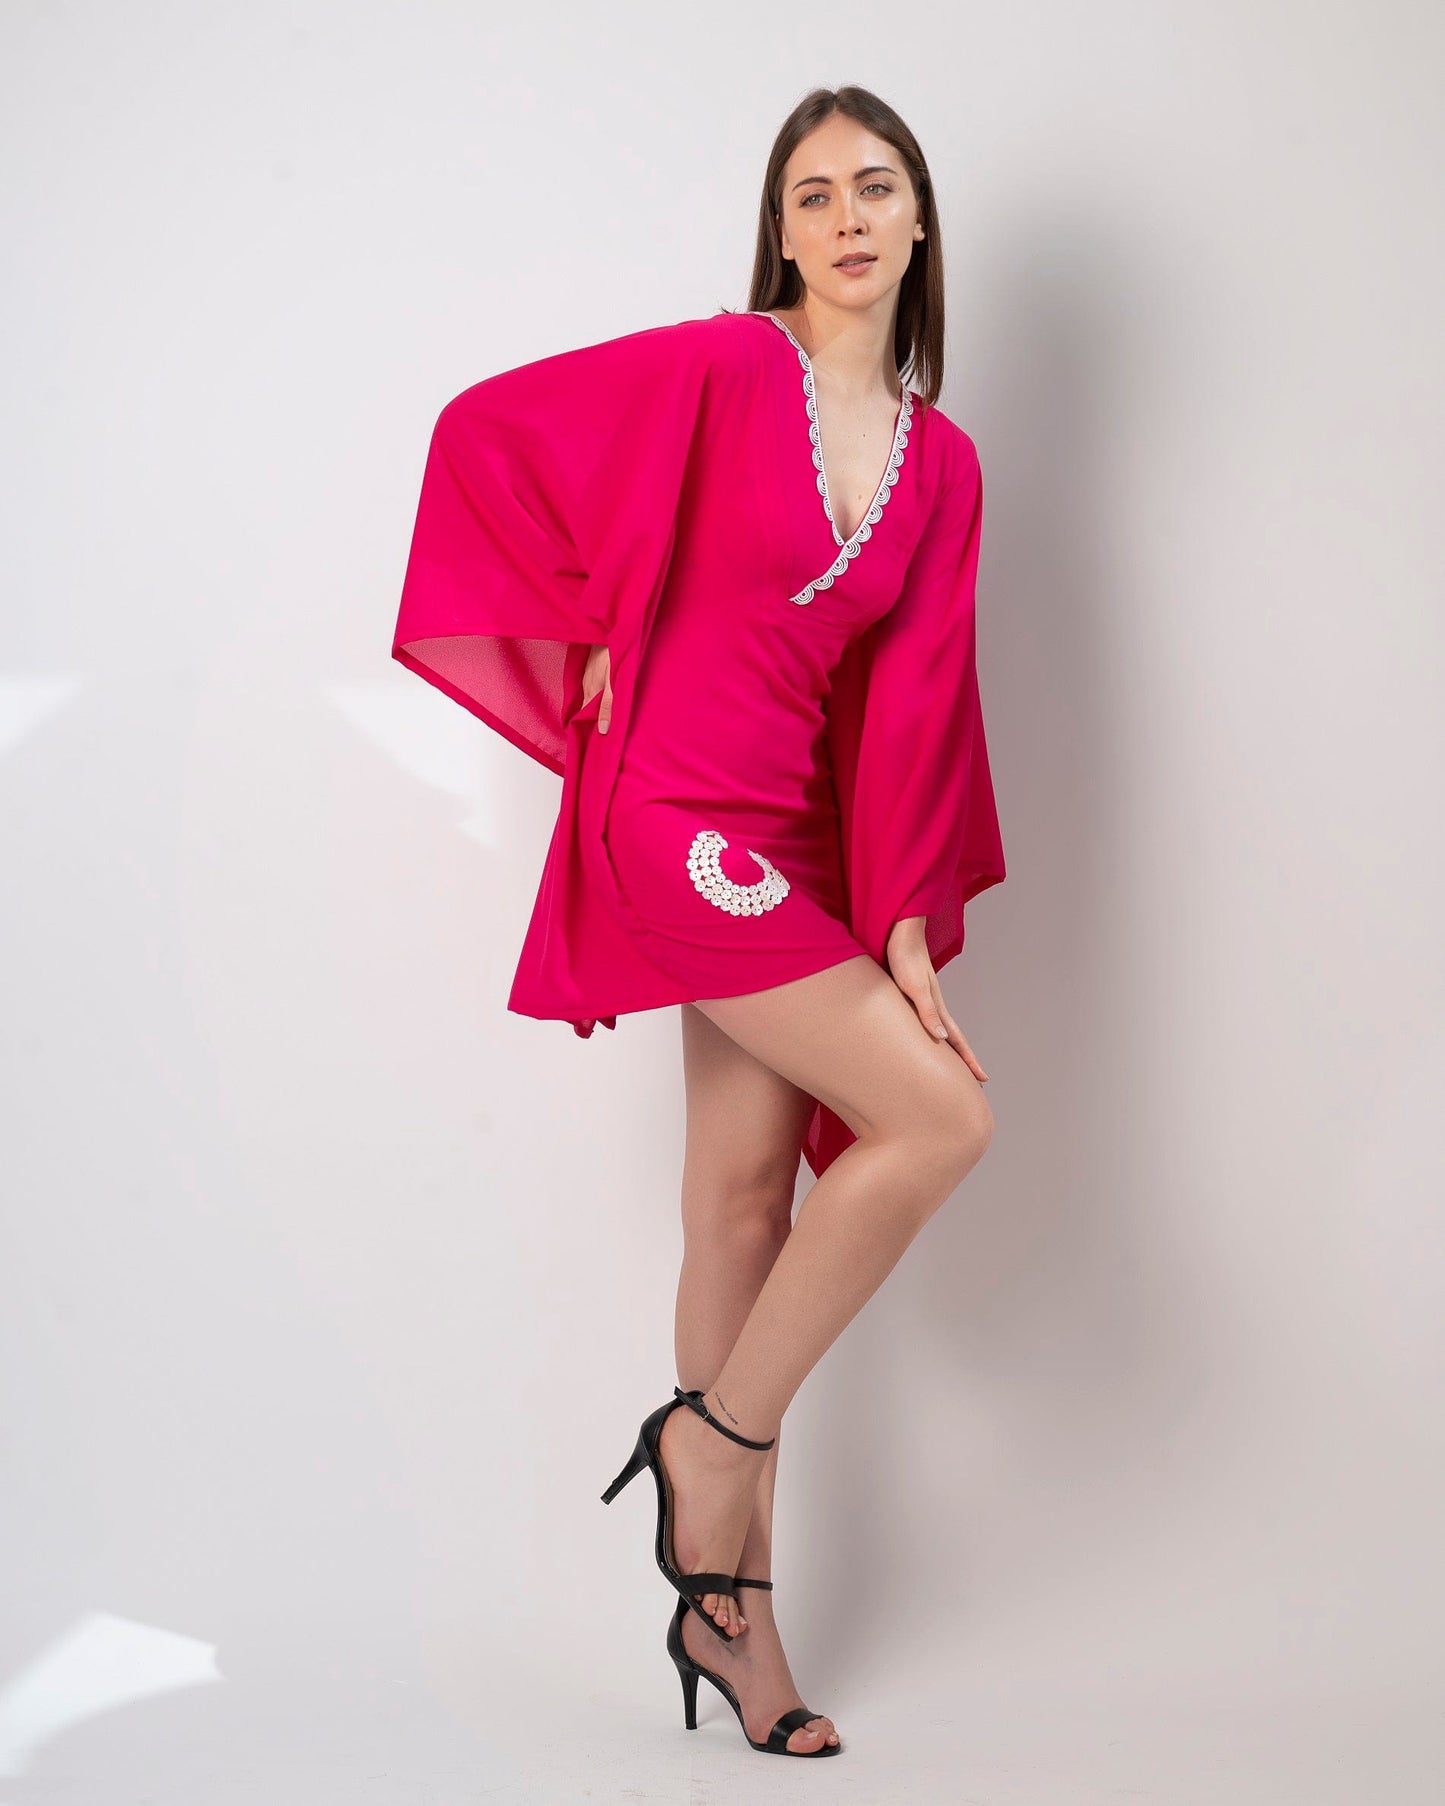 This flowy pink short kaftan dress is made of soft georgette lycra and is perfect for any occasion, whether it's a casual day out or resort party wear.